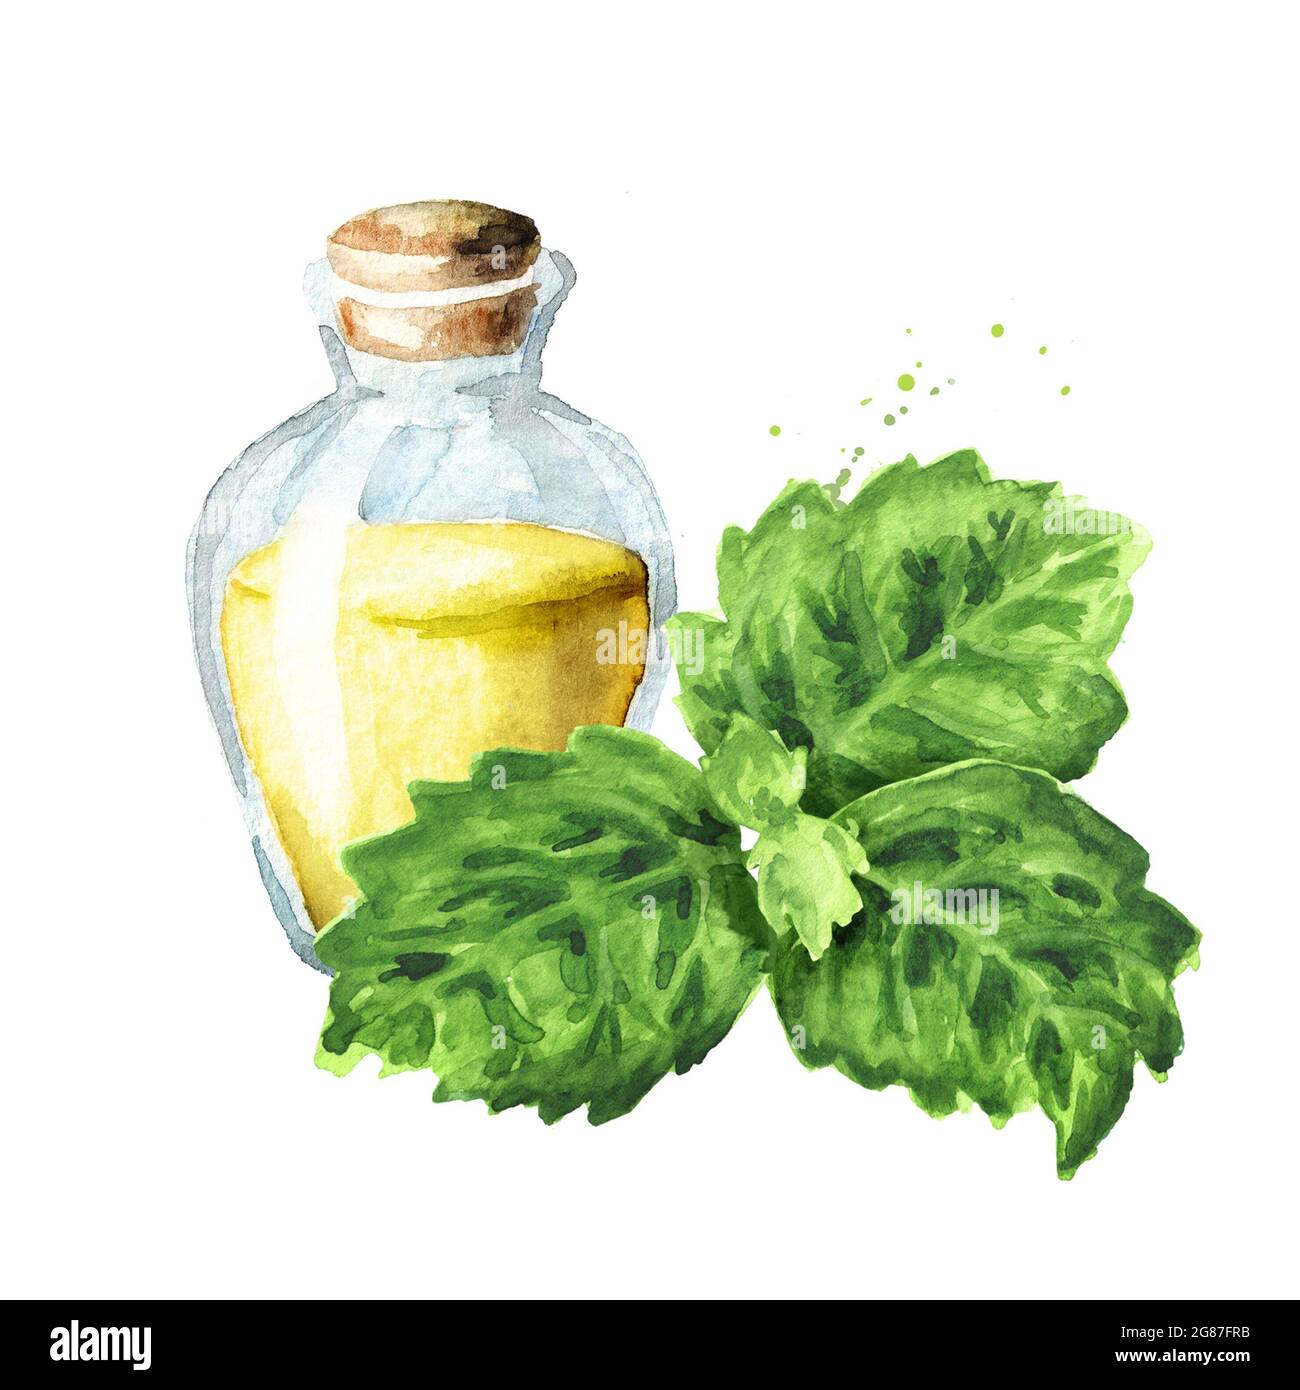 Patchouli or Pogostemon cablini essential oil, Hand drawn watercolor illustration isolated on white background Stock Photo